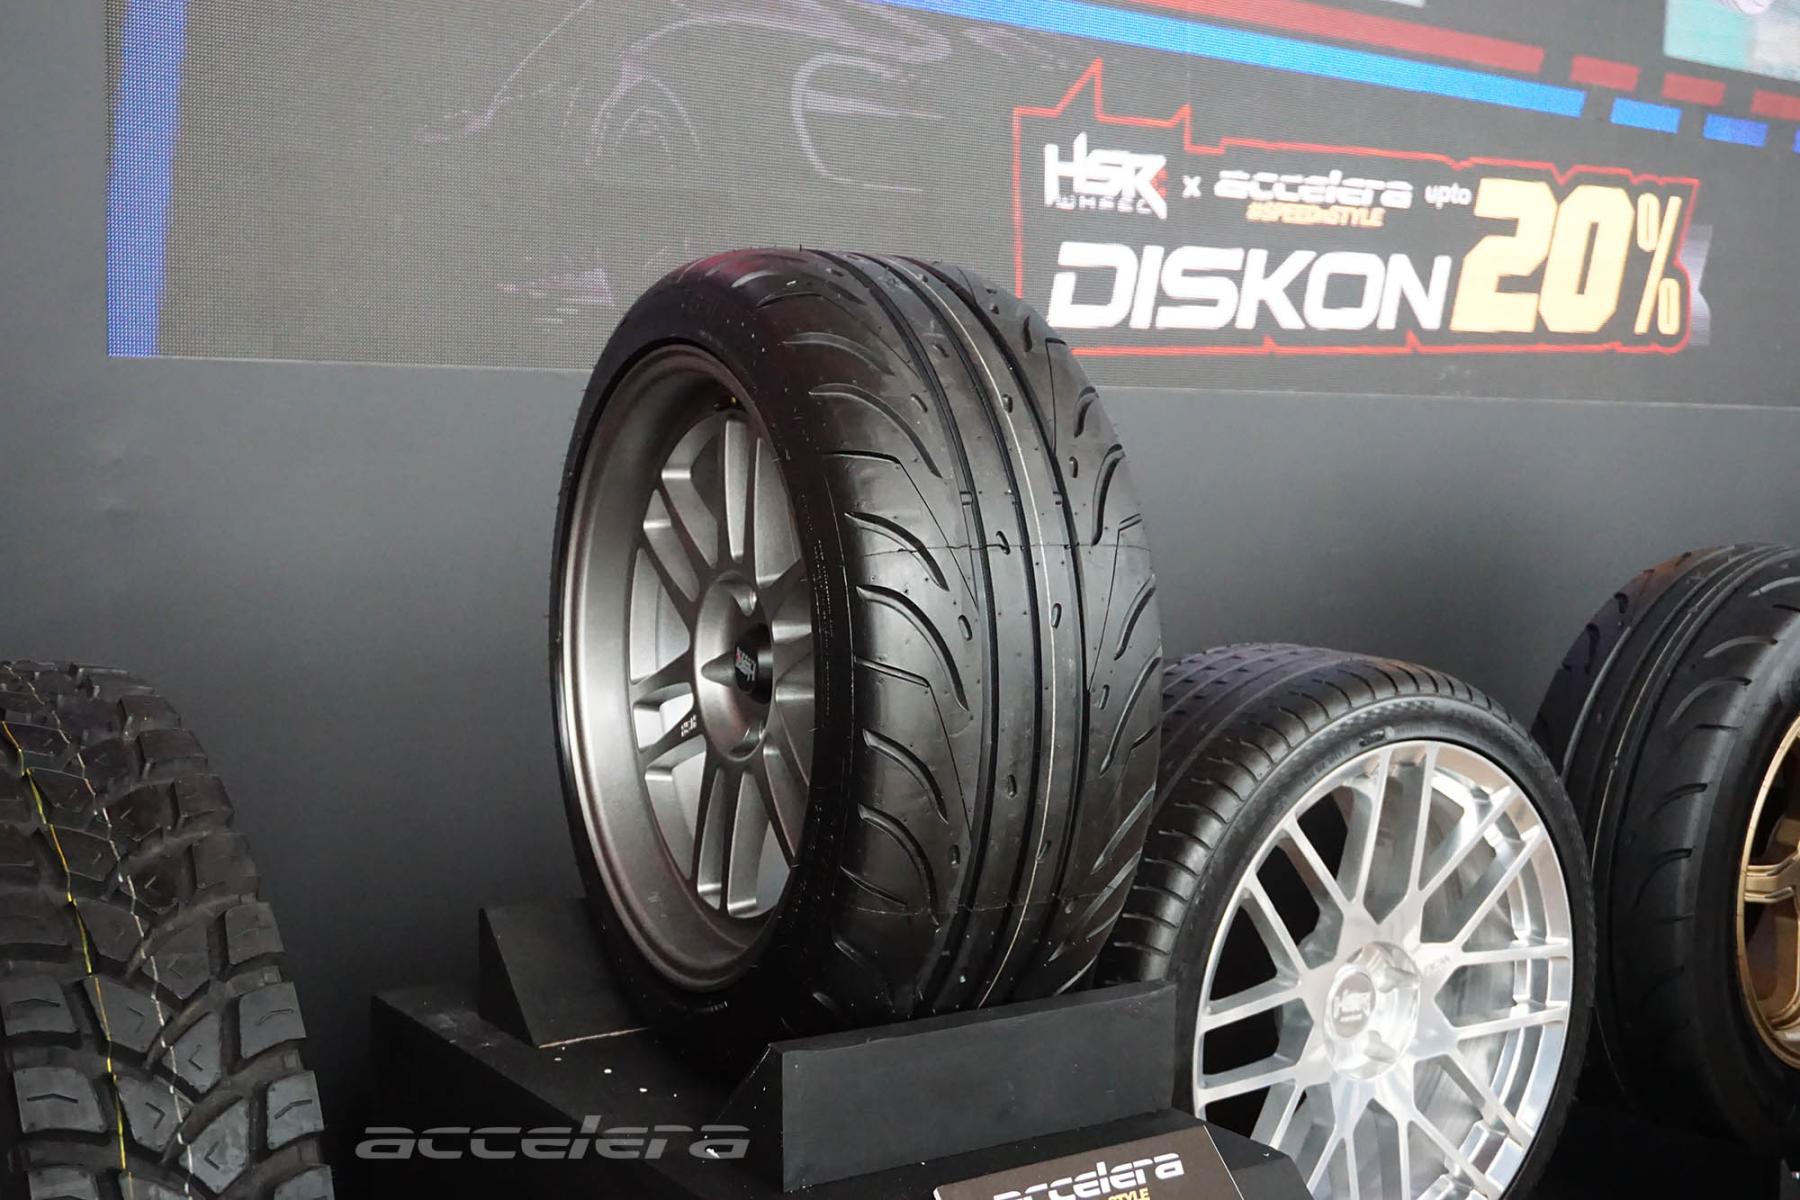 New Accelera drifting tyre launched